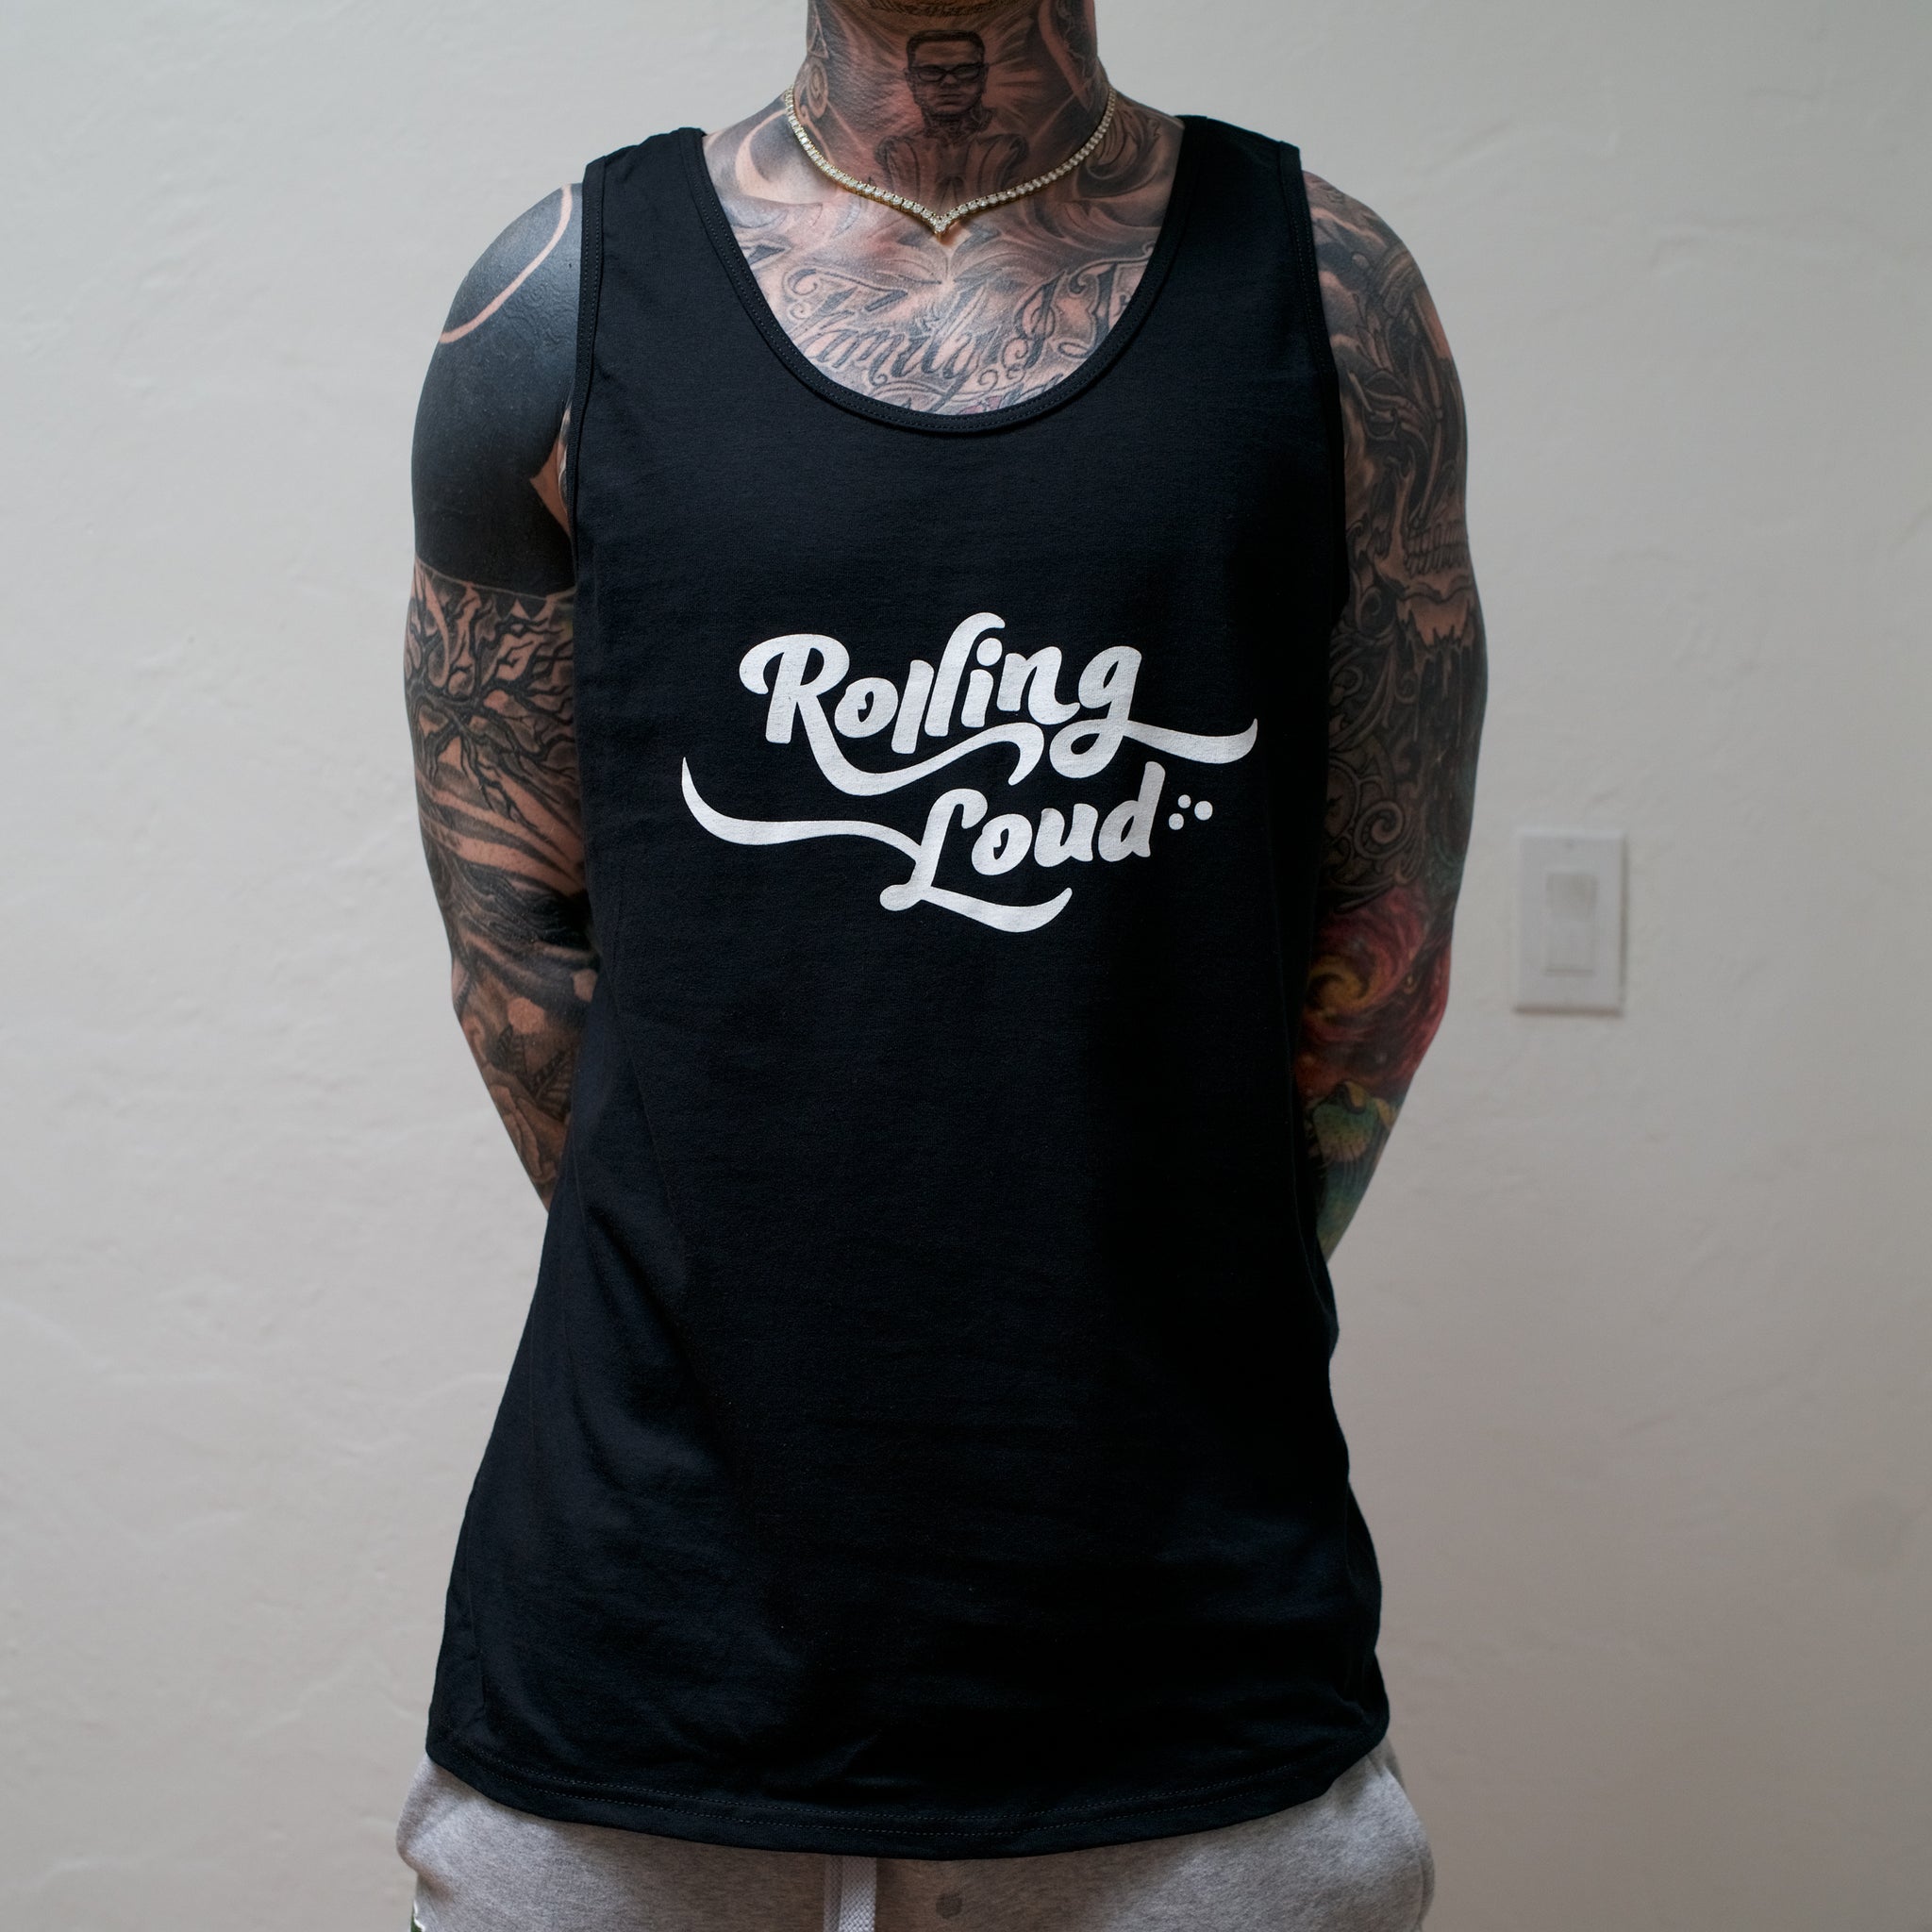 Rolling Loud Miami Bass Will Melt Your Face Tank Top